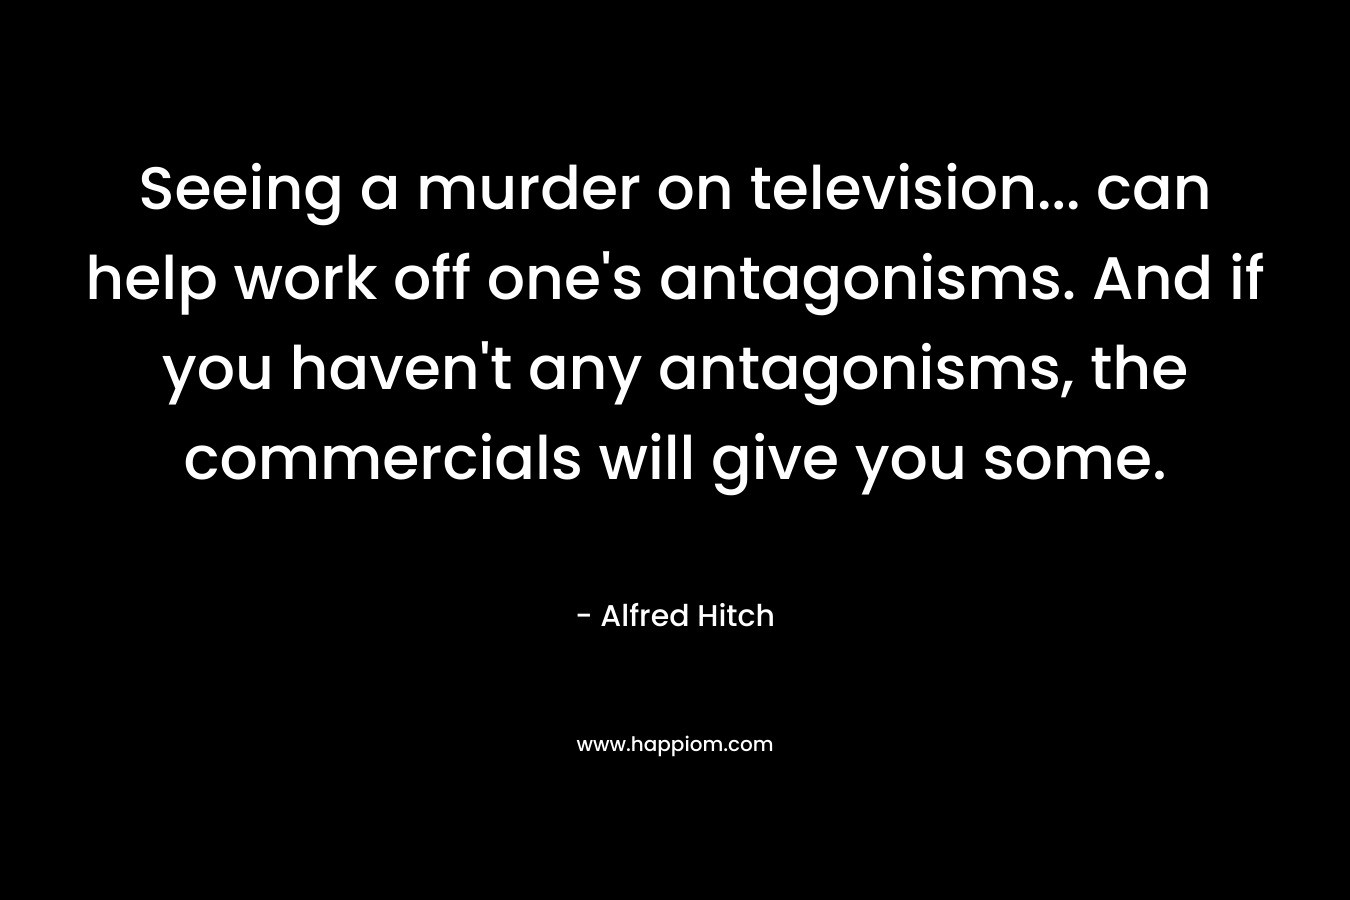 Seeing a murder on television... can help work off one's antagonisms. And if you haven't any antagonisms, the commercials will give you some.